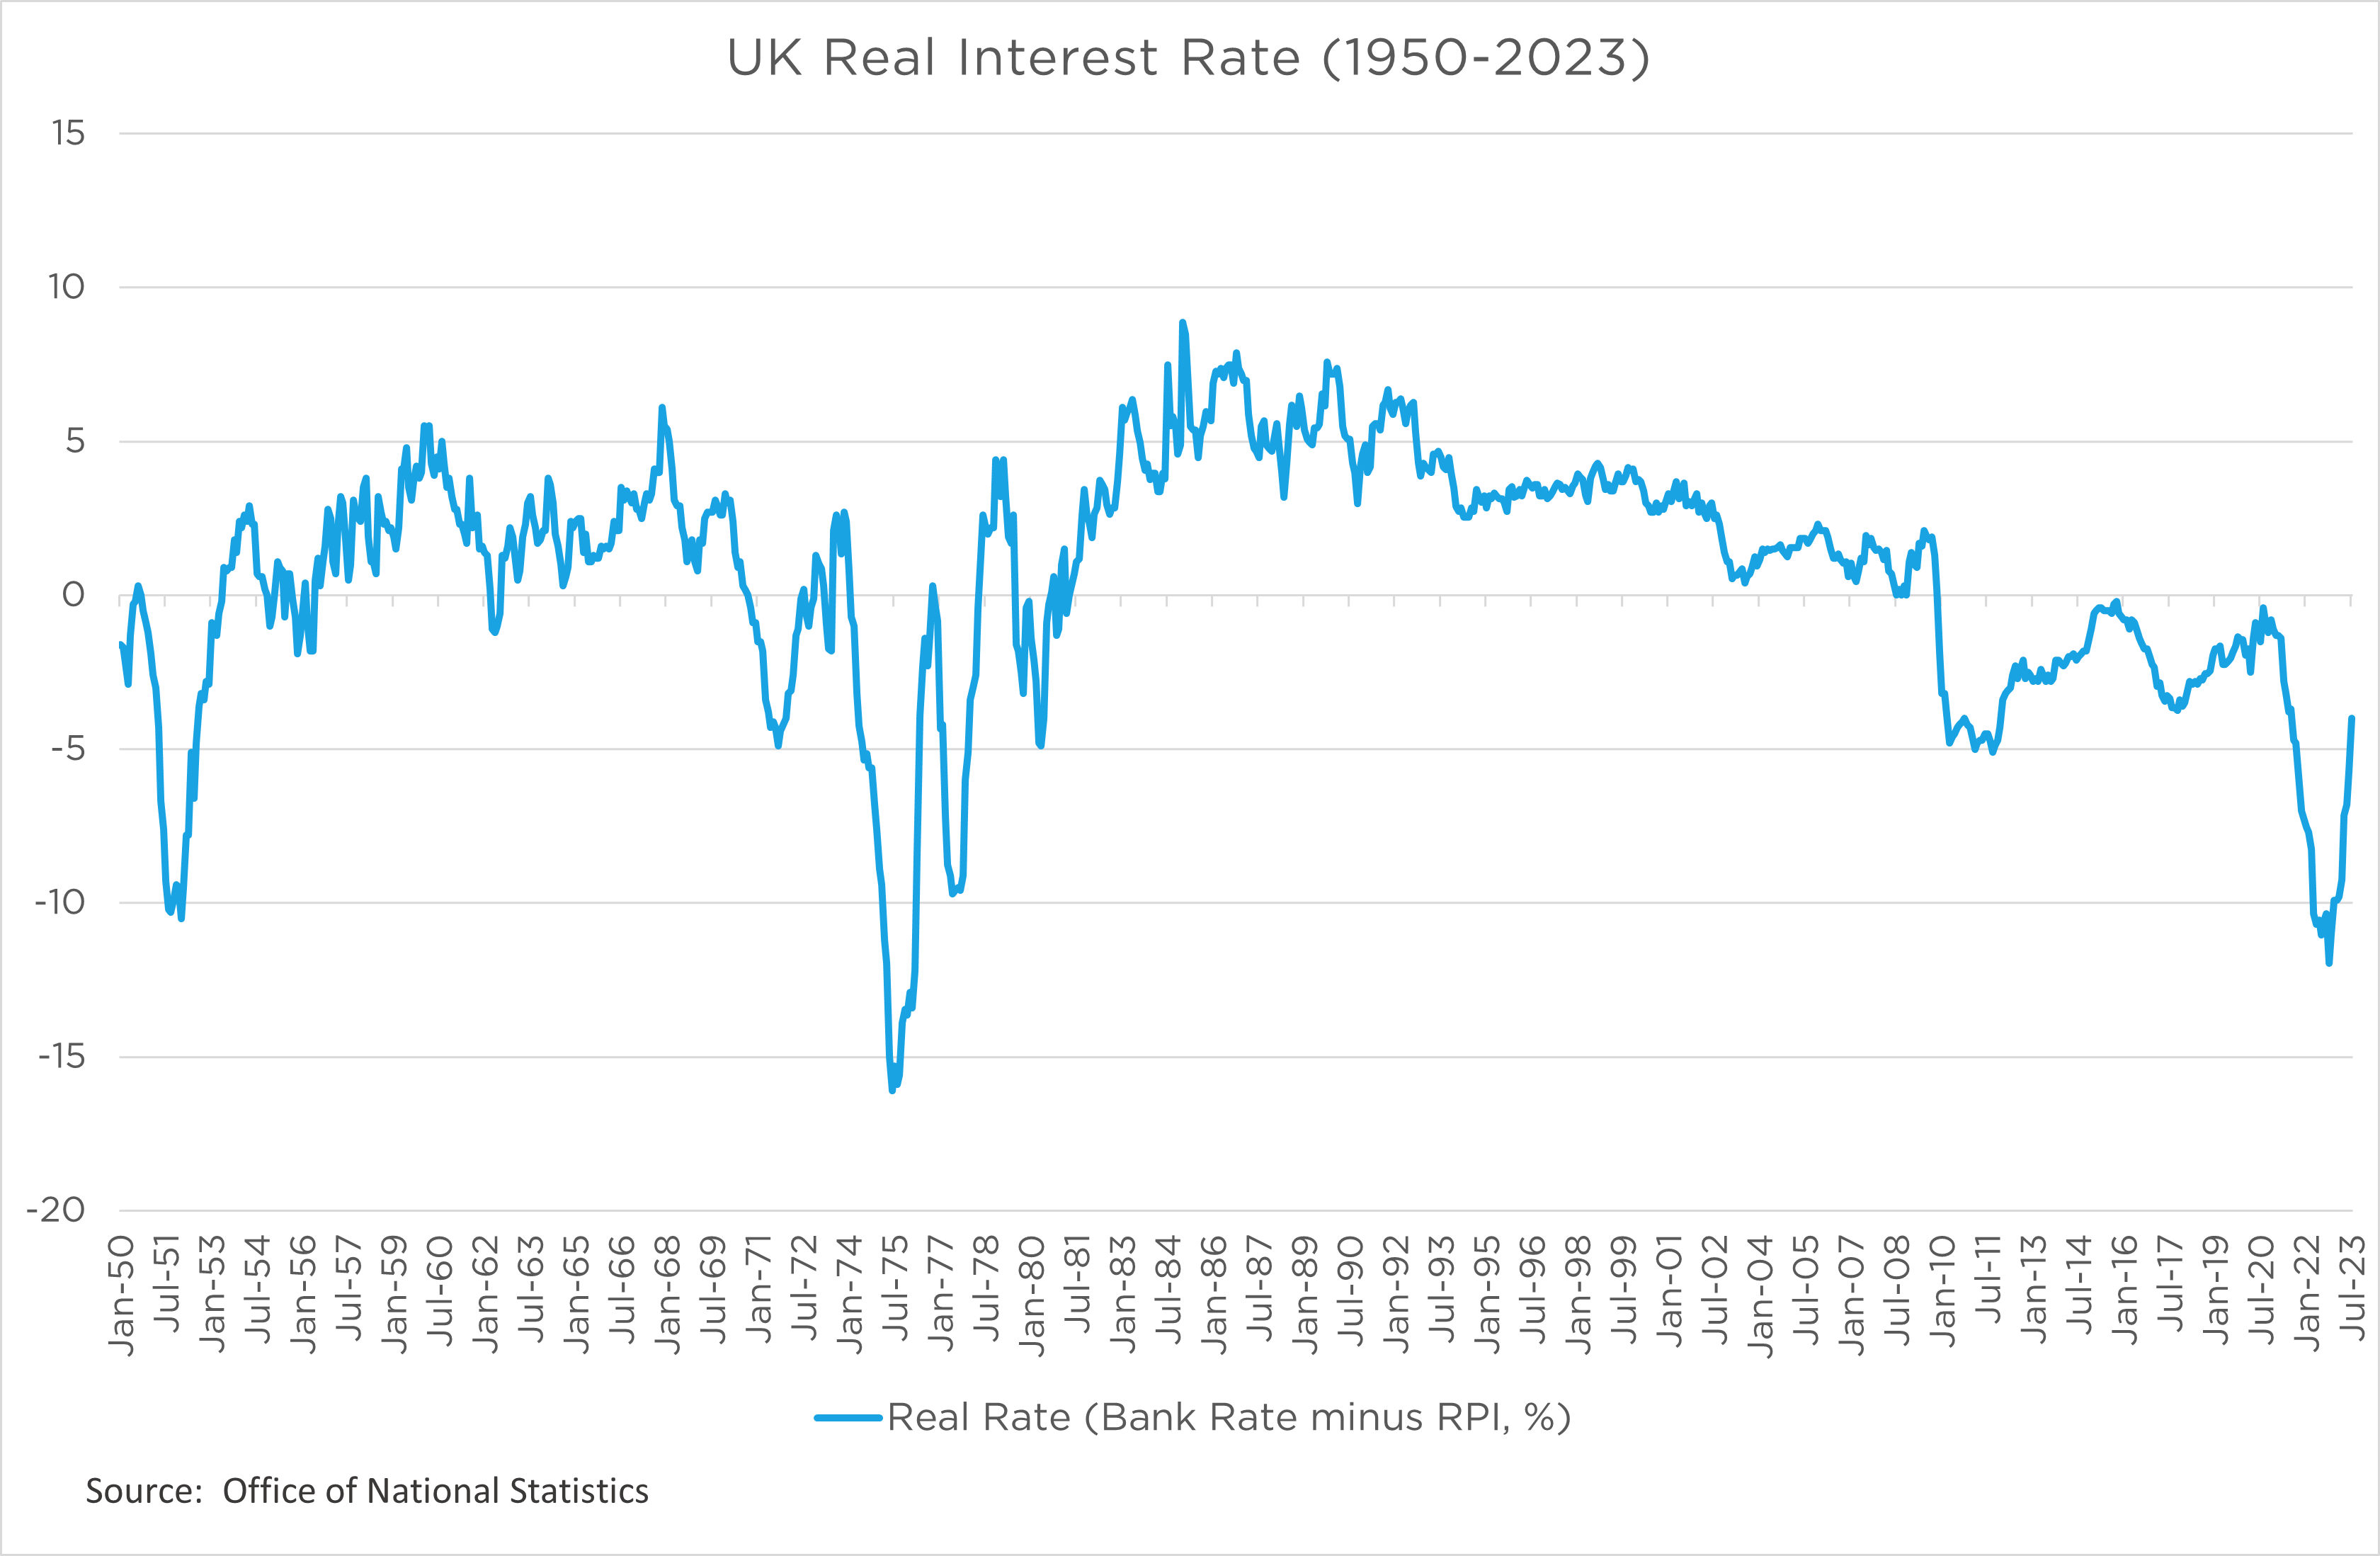 Chart shows UK Real Interest Rates from 1950 to 2023